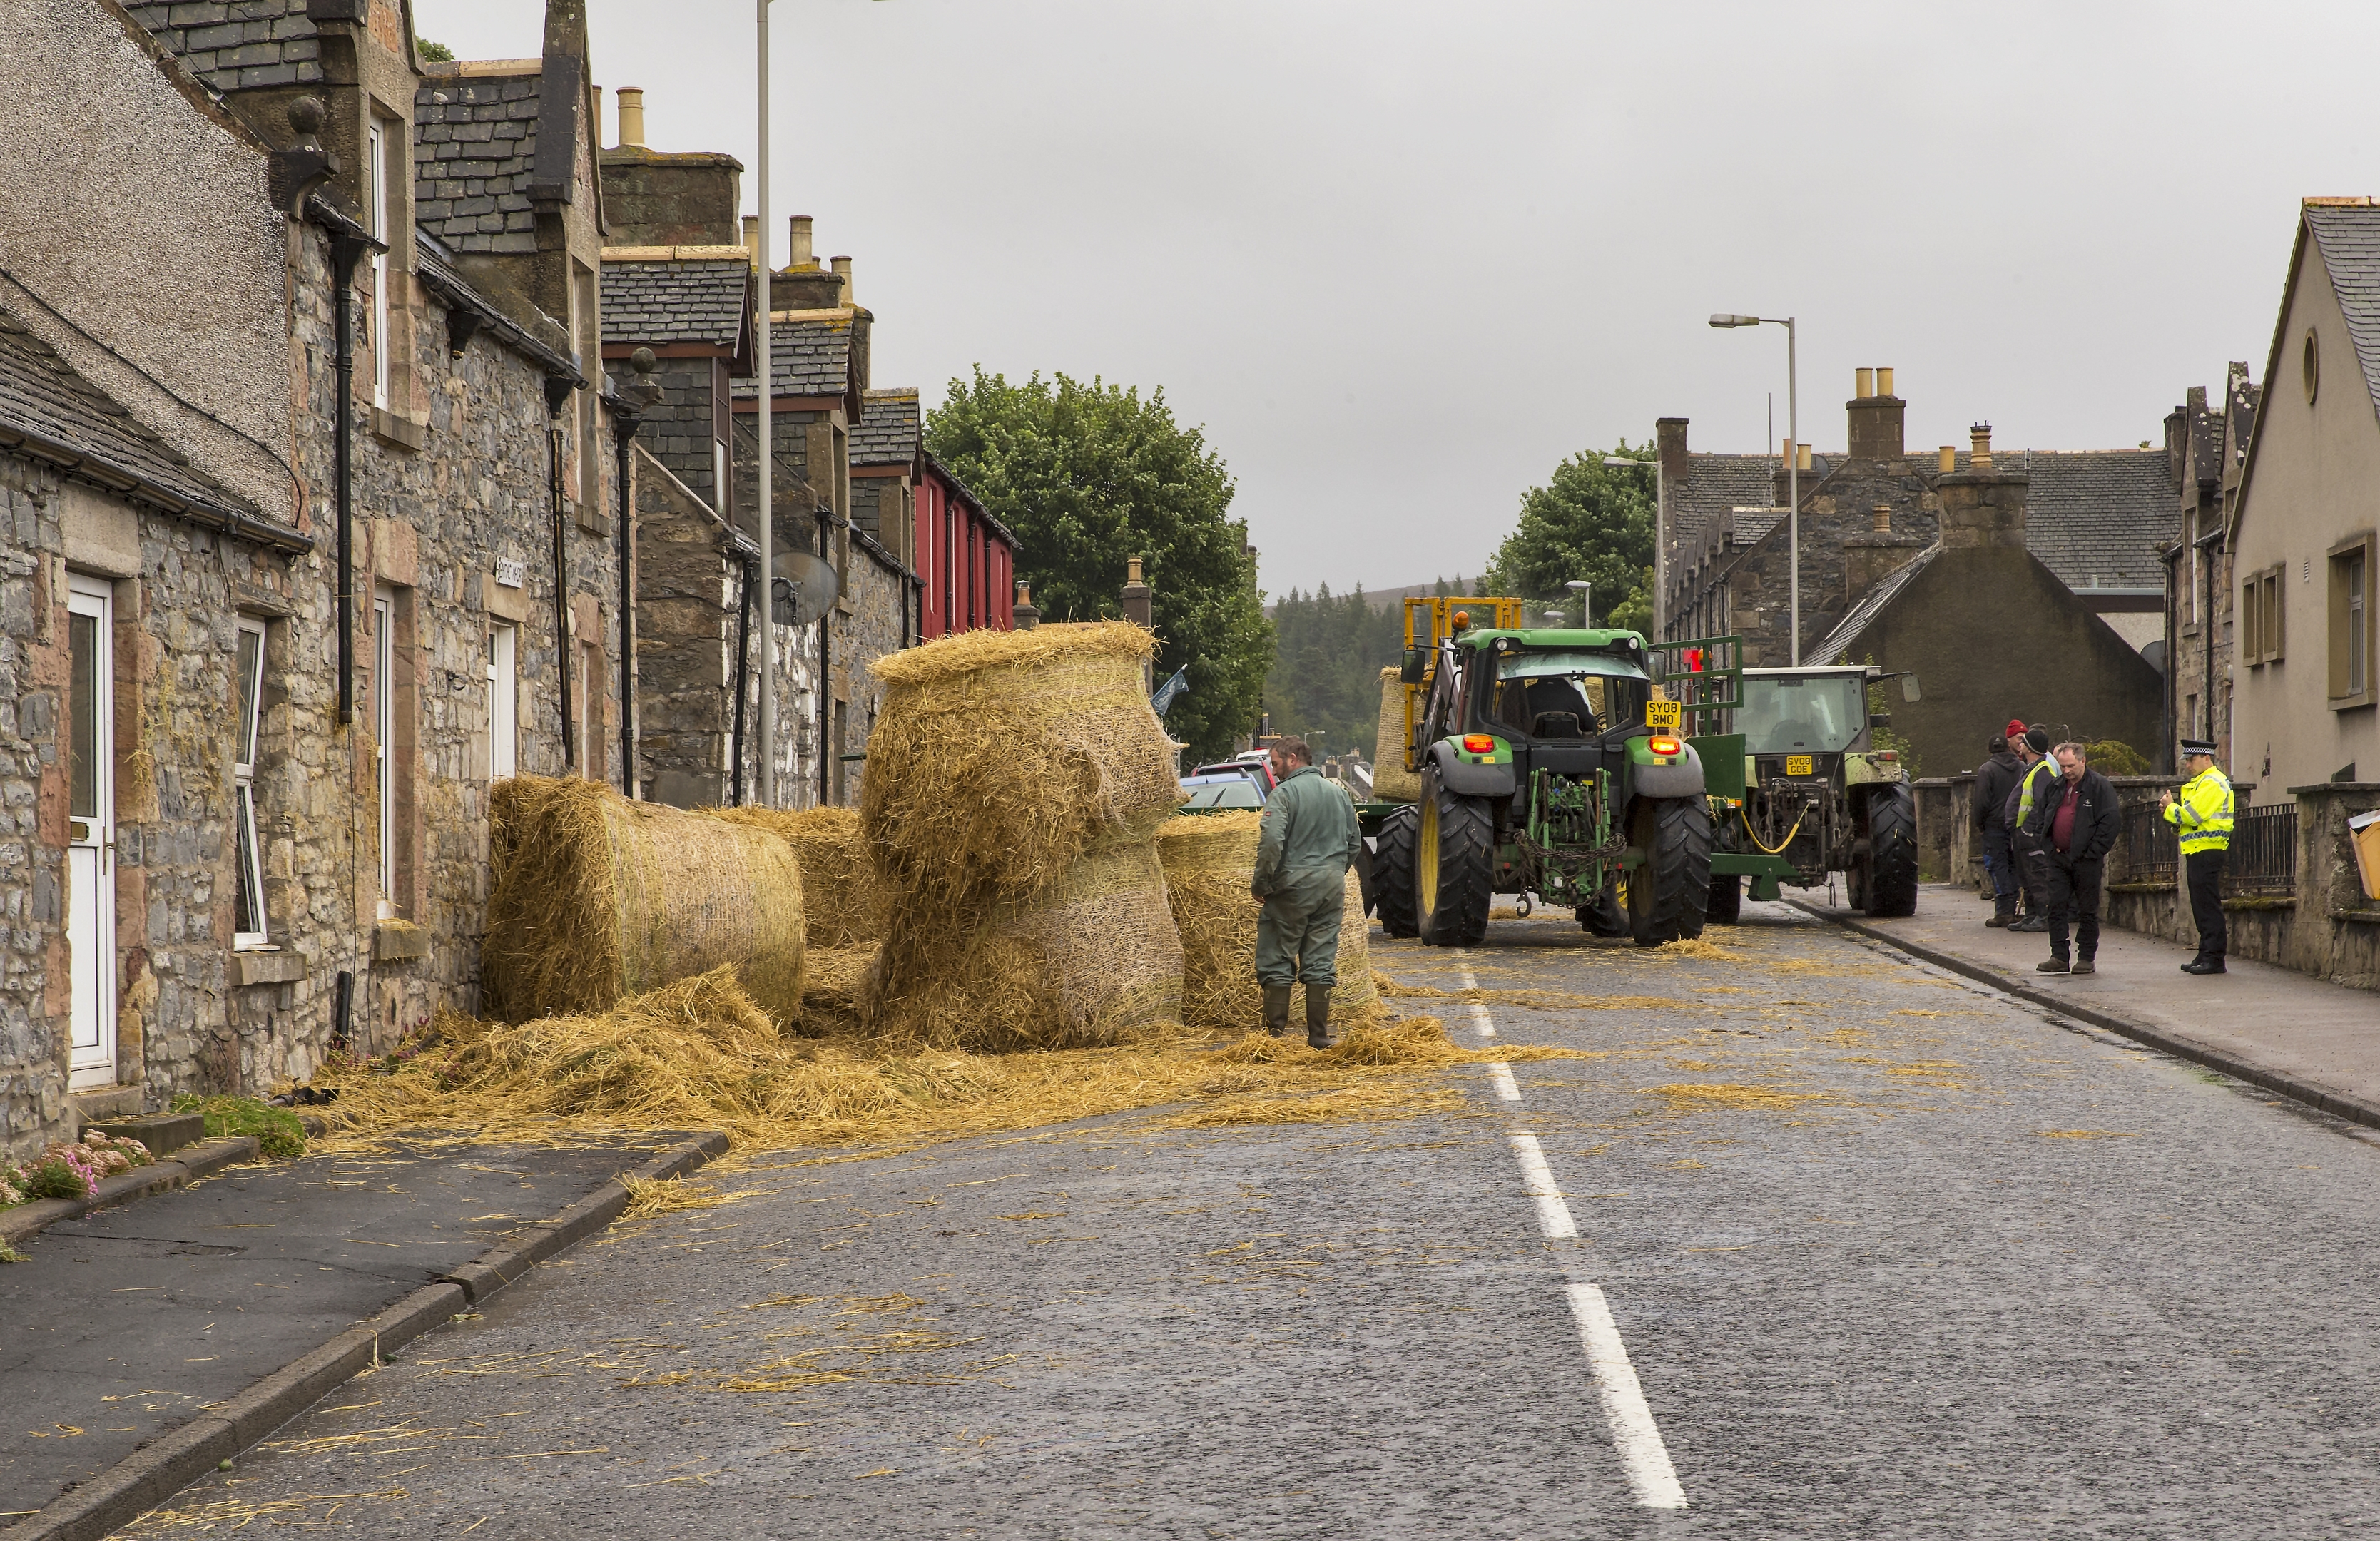 Bales shed across the road